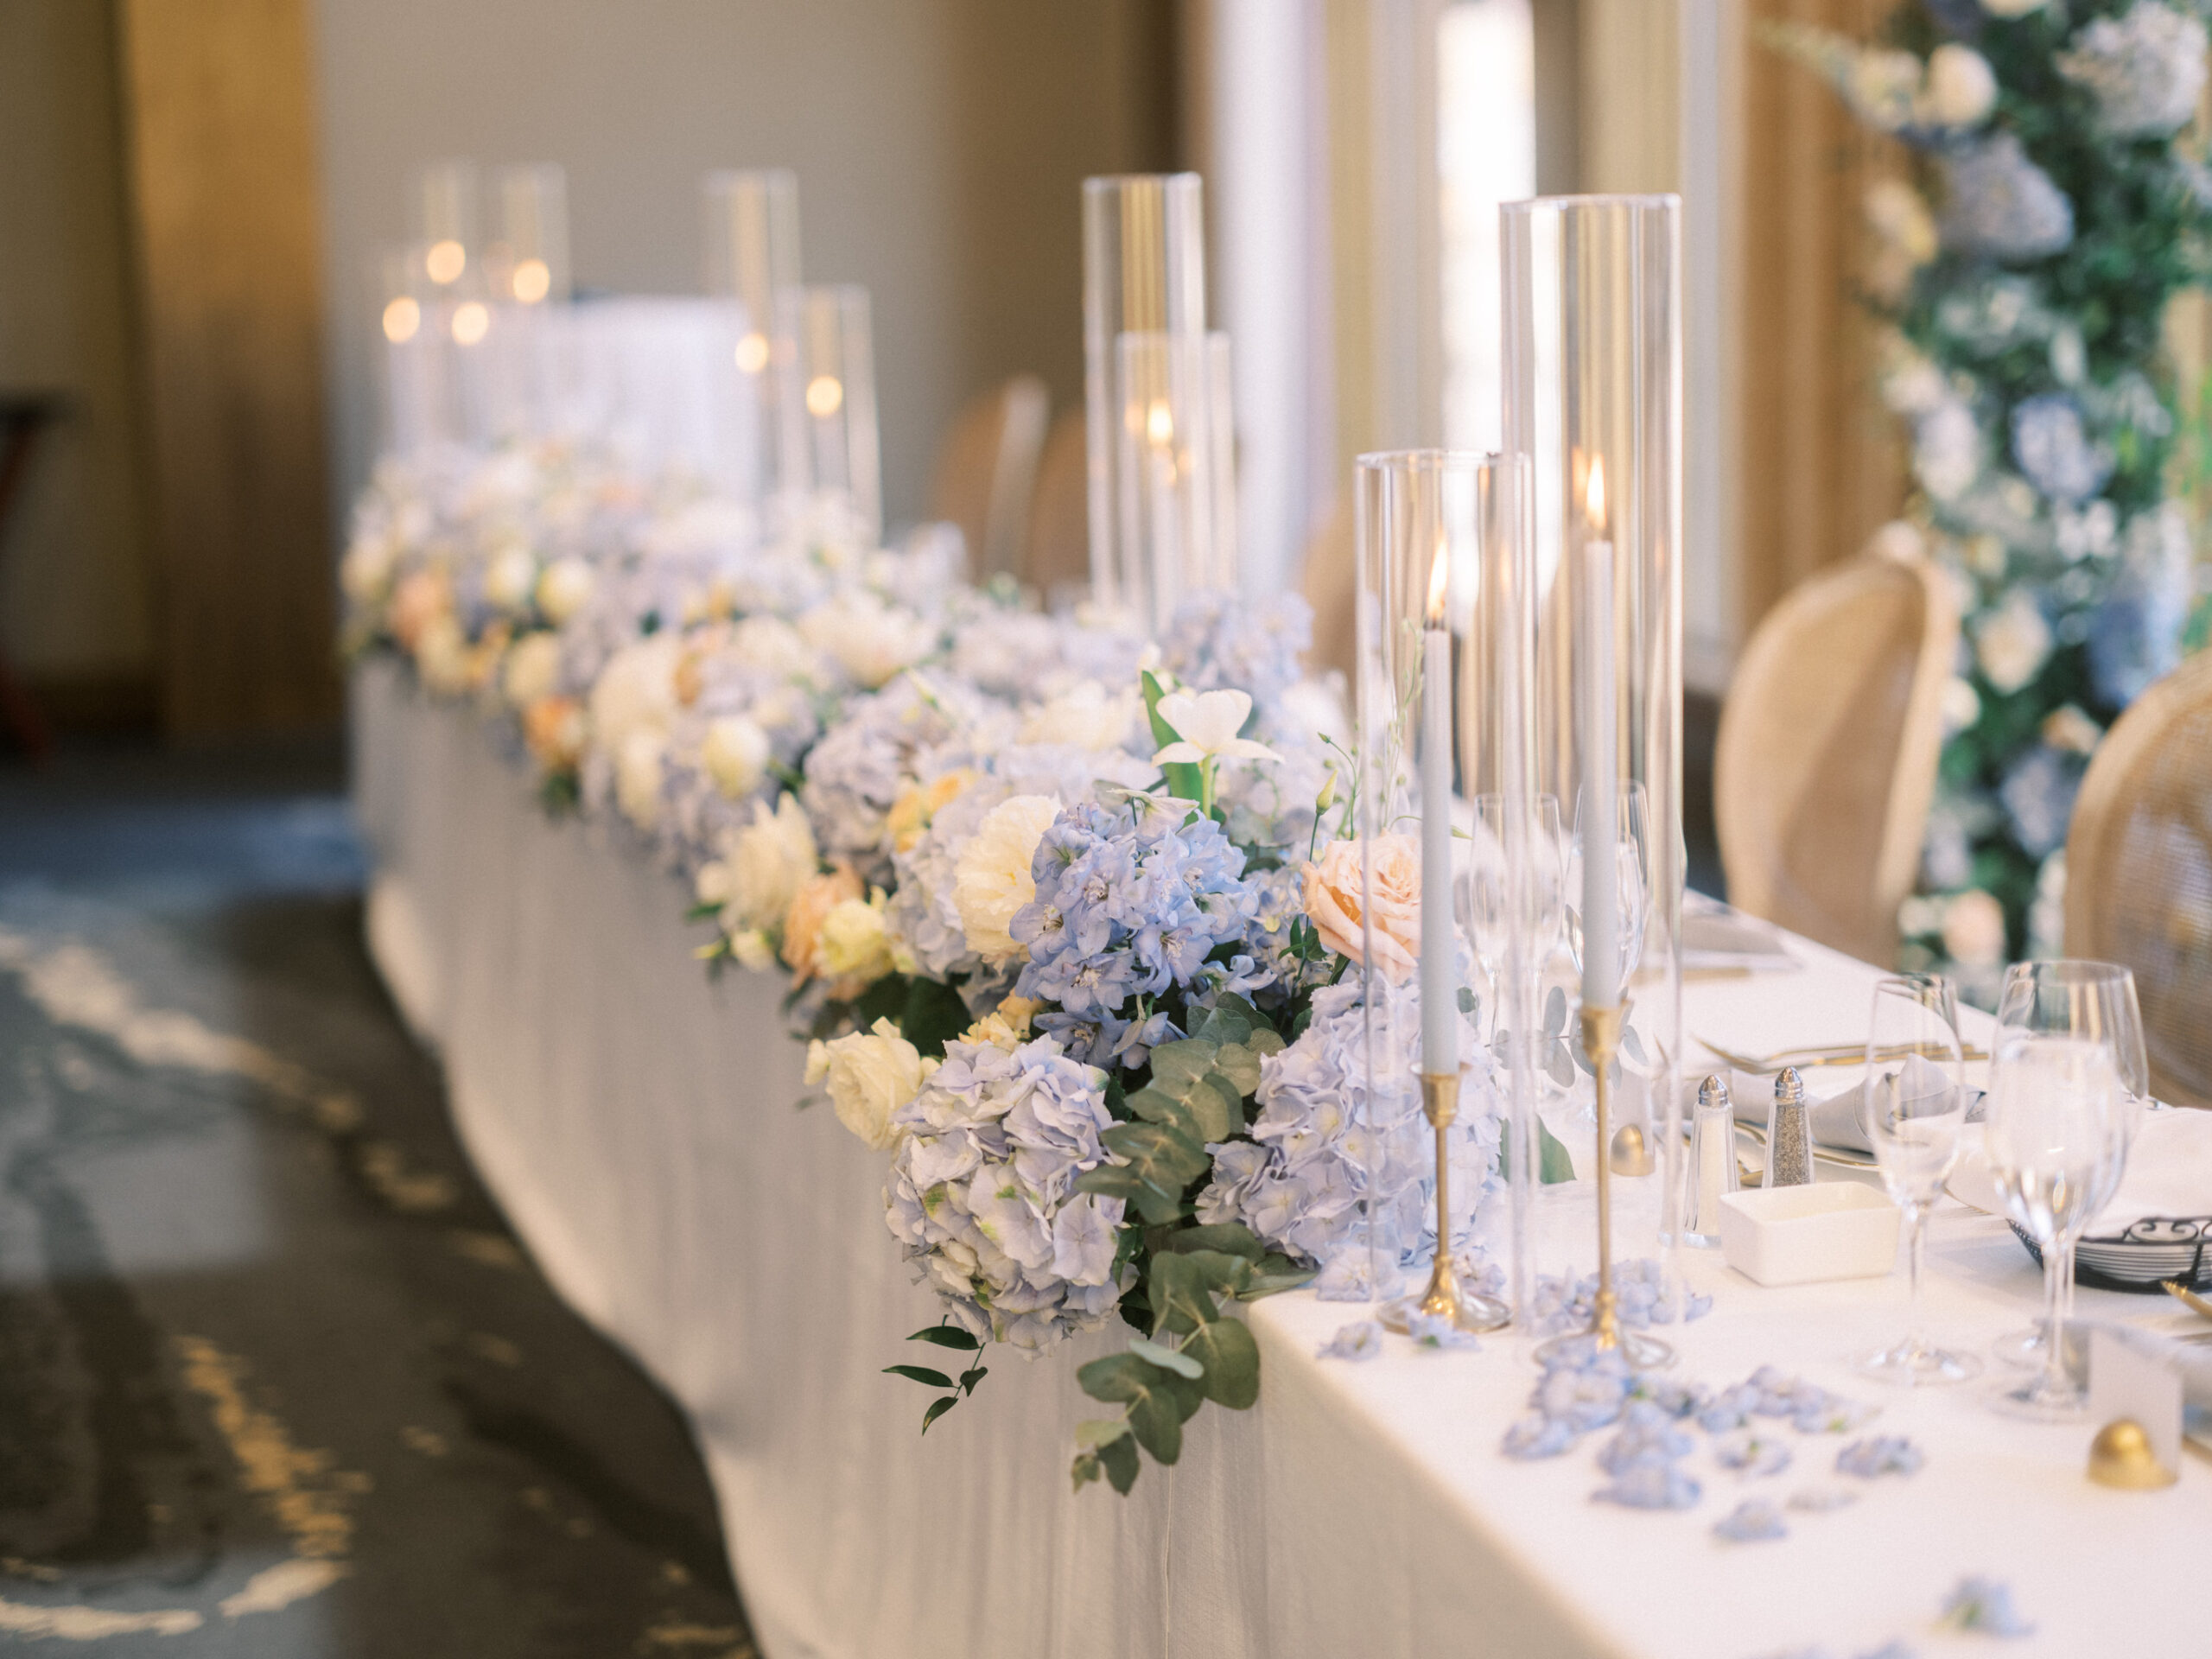 French Blue Parisian Wedding Inspiration, blue tapered candles wedding, gold cutlery, head table florals, bridal table flowers, hydrangea centrepieces, tall hydrangea centrepiece, blue ceremony arch, hydrangea ceremony arch, french wedding, light blue wedding, dusty blue florals, anemones, wedding floral inspo, blue wedding hydrangeas, nicole sarah